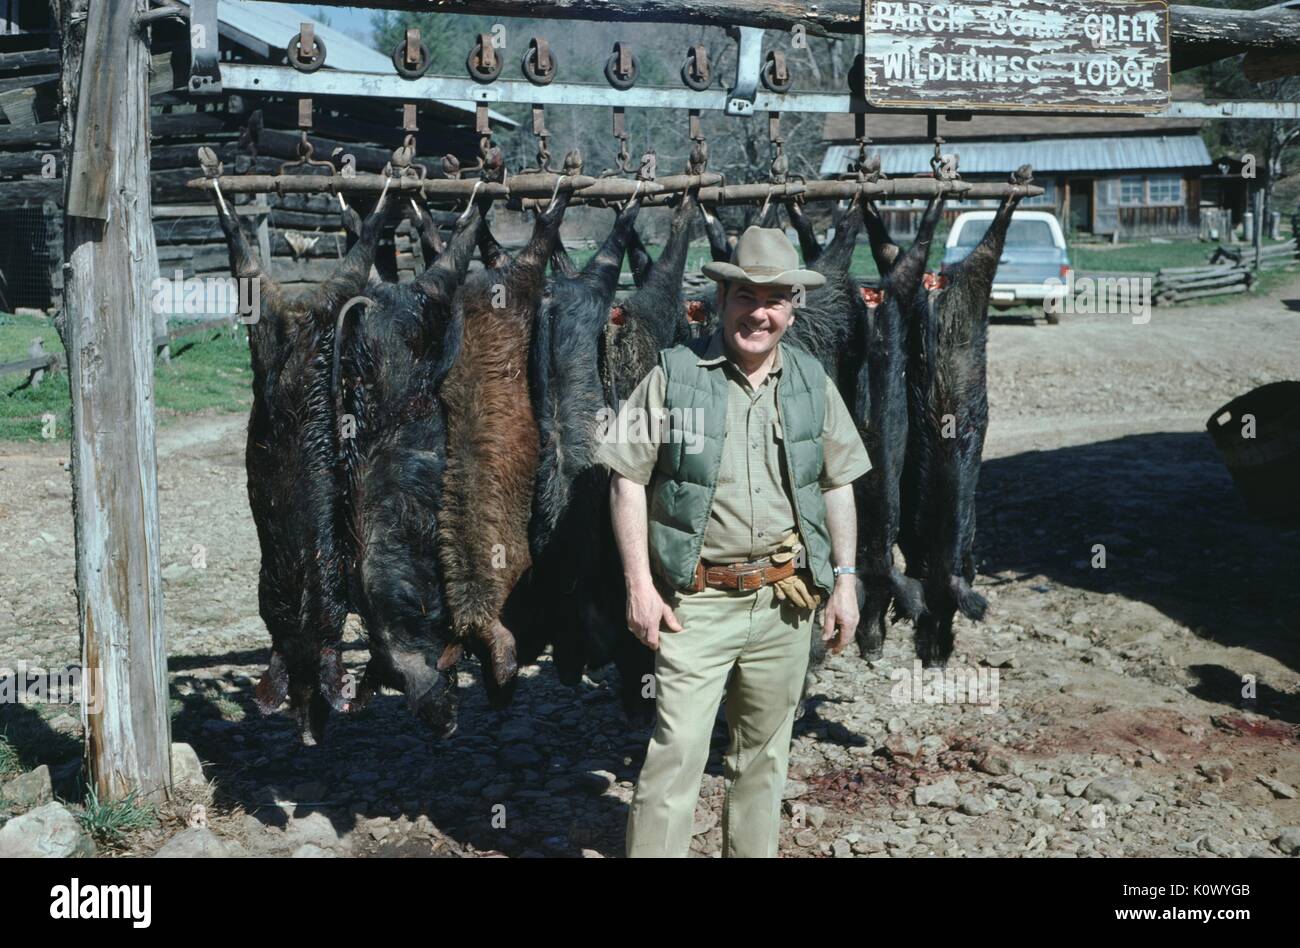 Hunter in forest green clothing, wearing a vest and cowboy hat, standing with a row of dead wild boars shot during a hunting trip, smiling and looking proud, Parched Corn Creek, Kentucky, 1975. Photo credit Smith Collection/Gado/Getty Images. Stock Photo